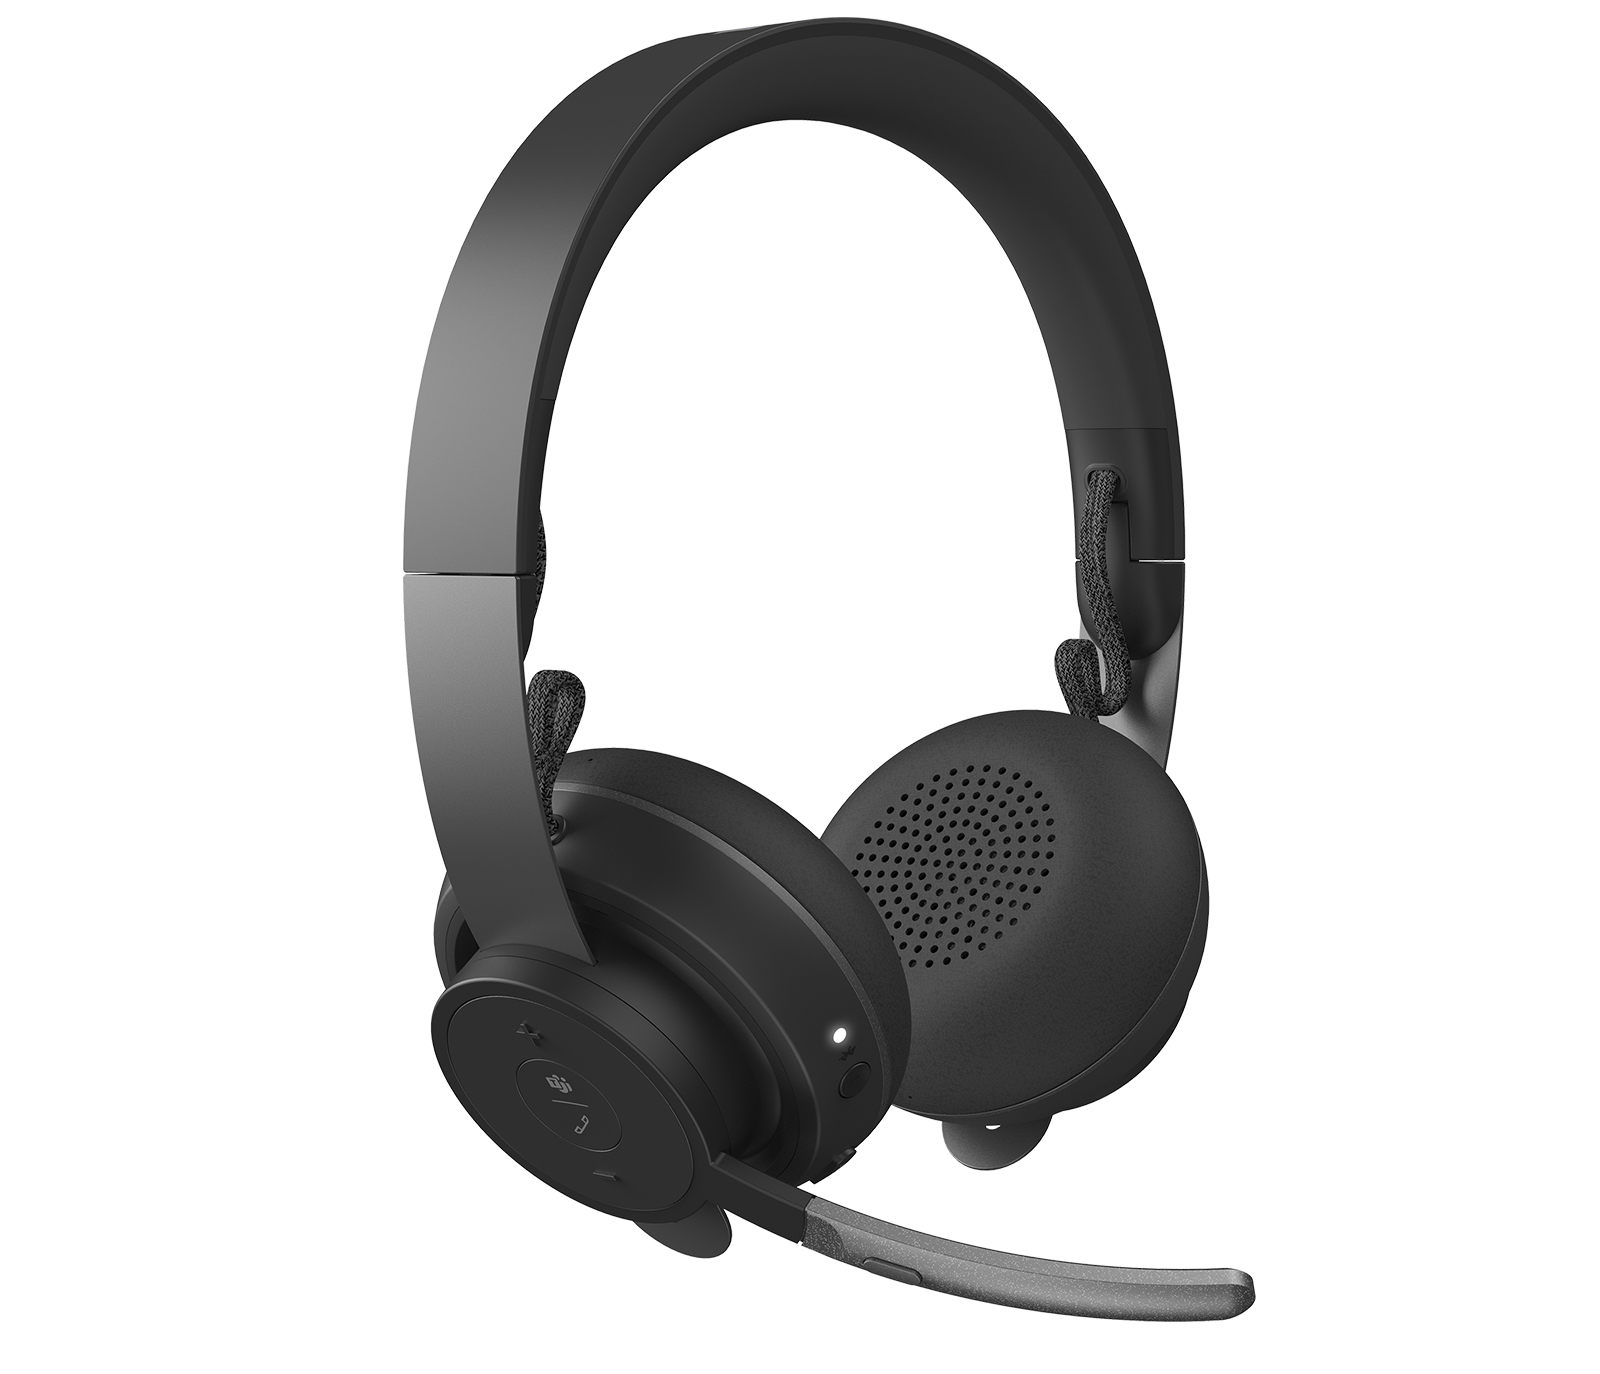 Logitech Zone Wireless Plus - Headset - on-ear - Bluetooth - wireless - active noise canceling - noise isolating - Certified for Microsoft Teams